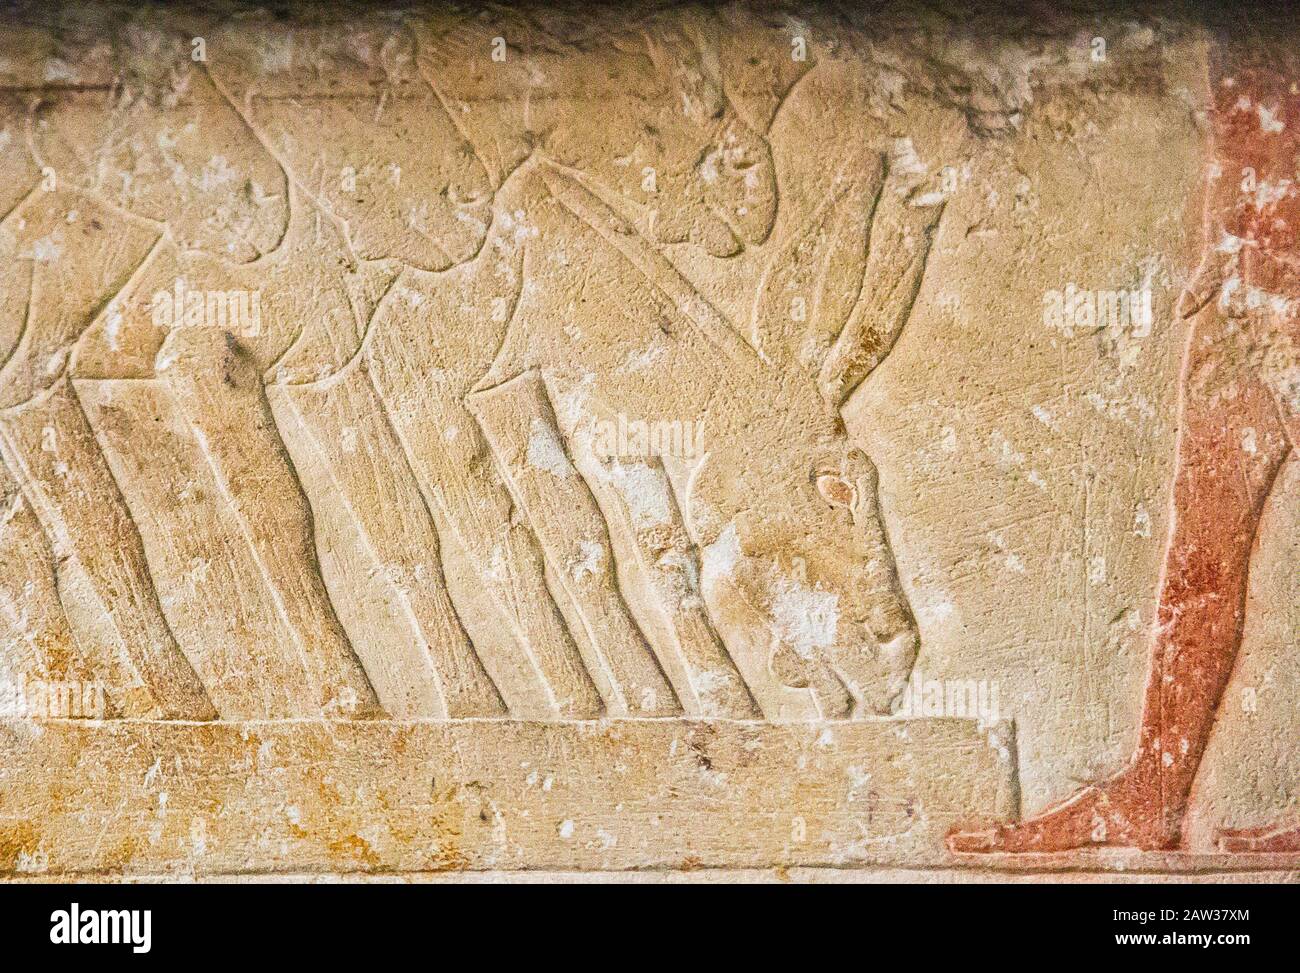 Egypt, Cairo, Egyptian Museum, from the tomb of Kaemrehu, Saqqara, detail of a big relief depicting agricultural scene : Donkeys. Stock Photo